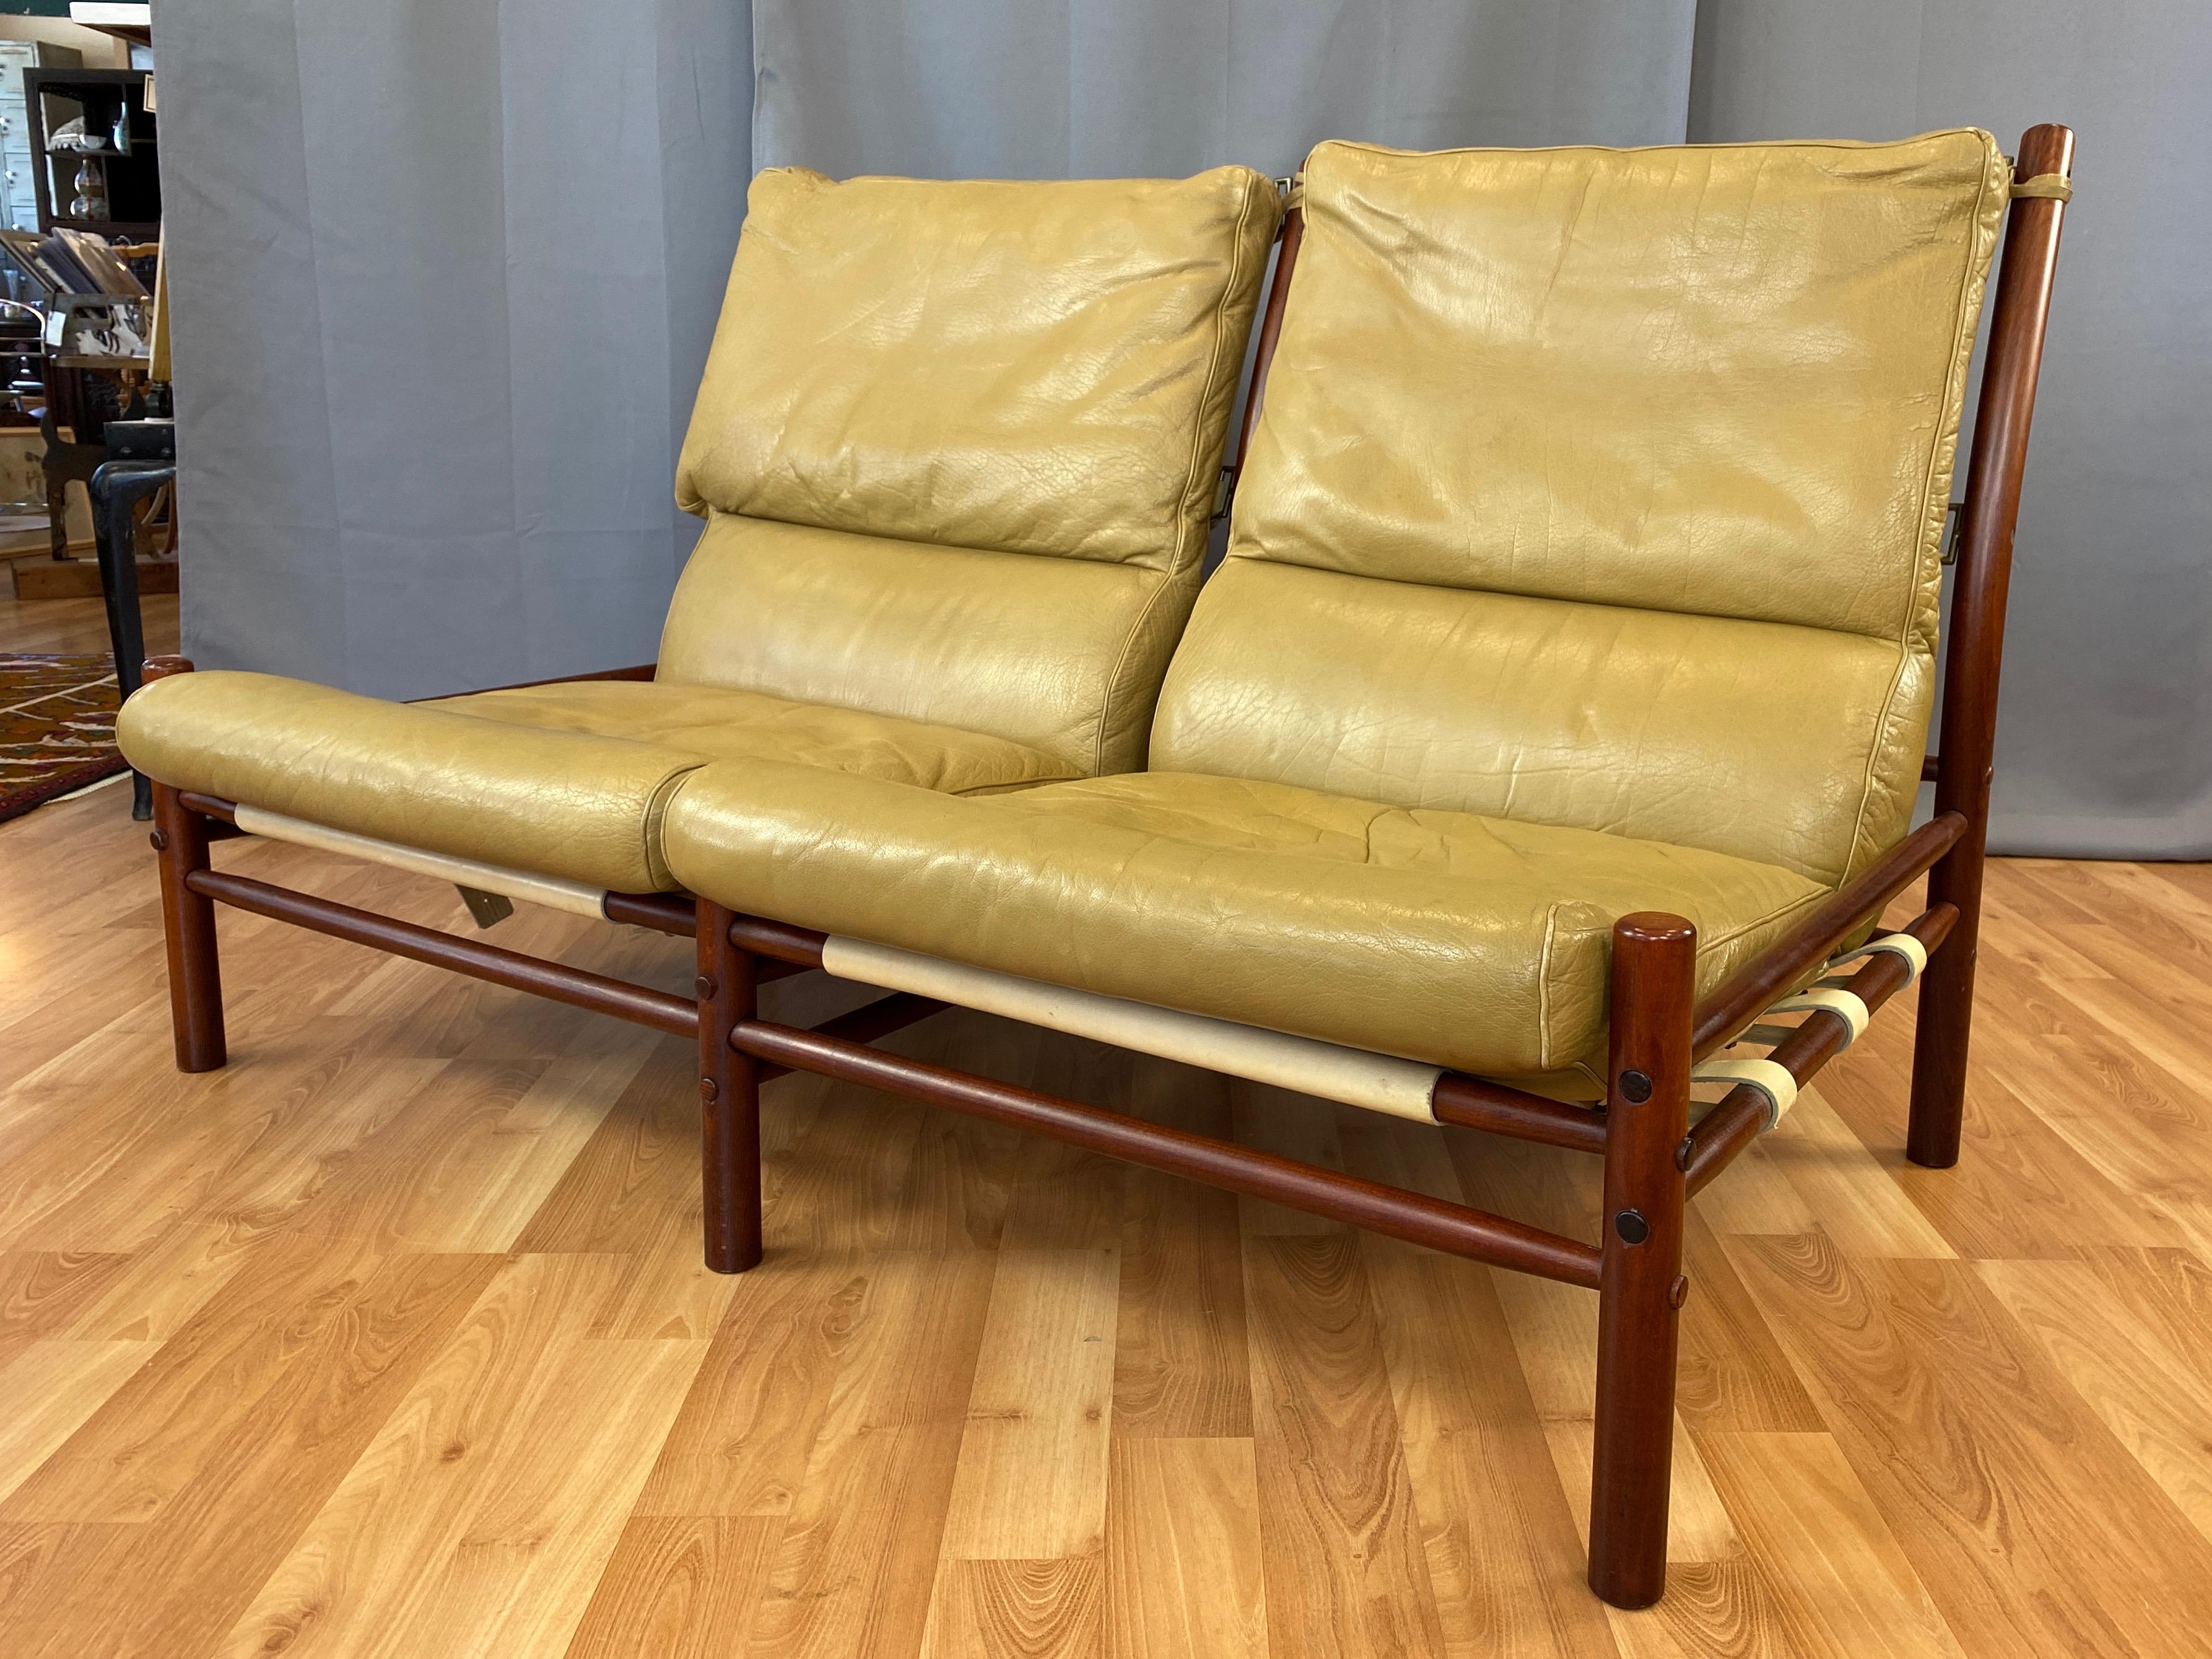 A handsome 1970s Inca armless settee or two-seat sofa by Swedish designer Arne Norell in teak-colored beech and light tan leather.

Solid beech frame with a tinted finish that gives it an attractive teak-like appearance. Tapered dowel crosspiece